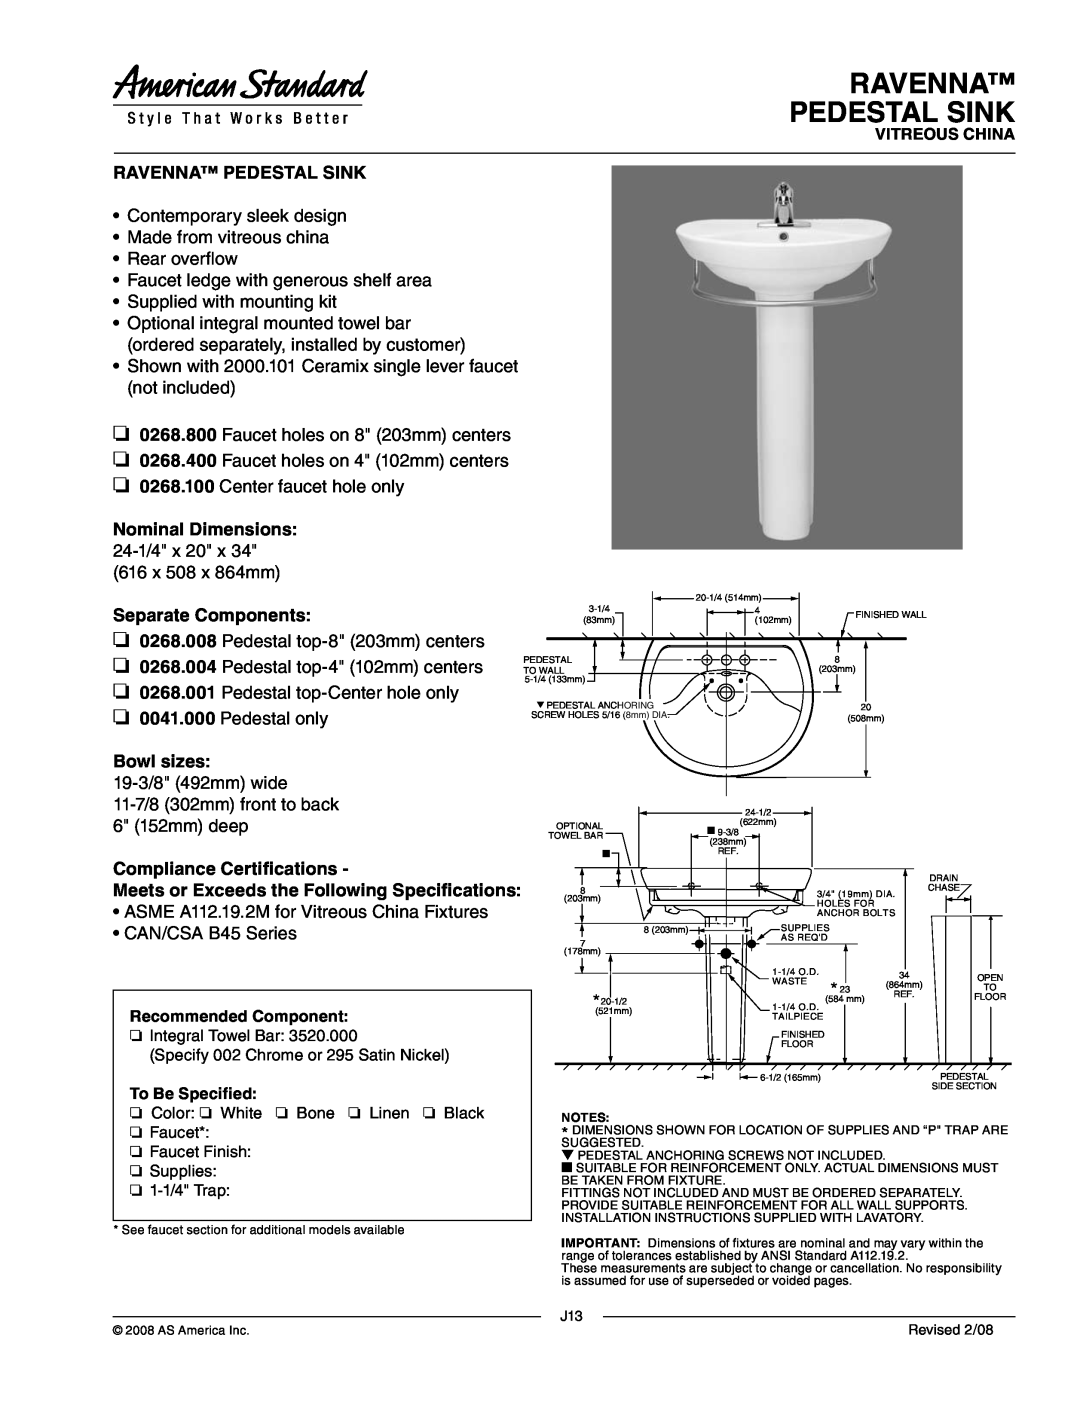 American Standard 0268.100, 0268.800 dimensions Ravenna Pedestal Sink, Nominal Dimensions, Separate Components, Bowl sizes 